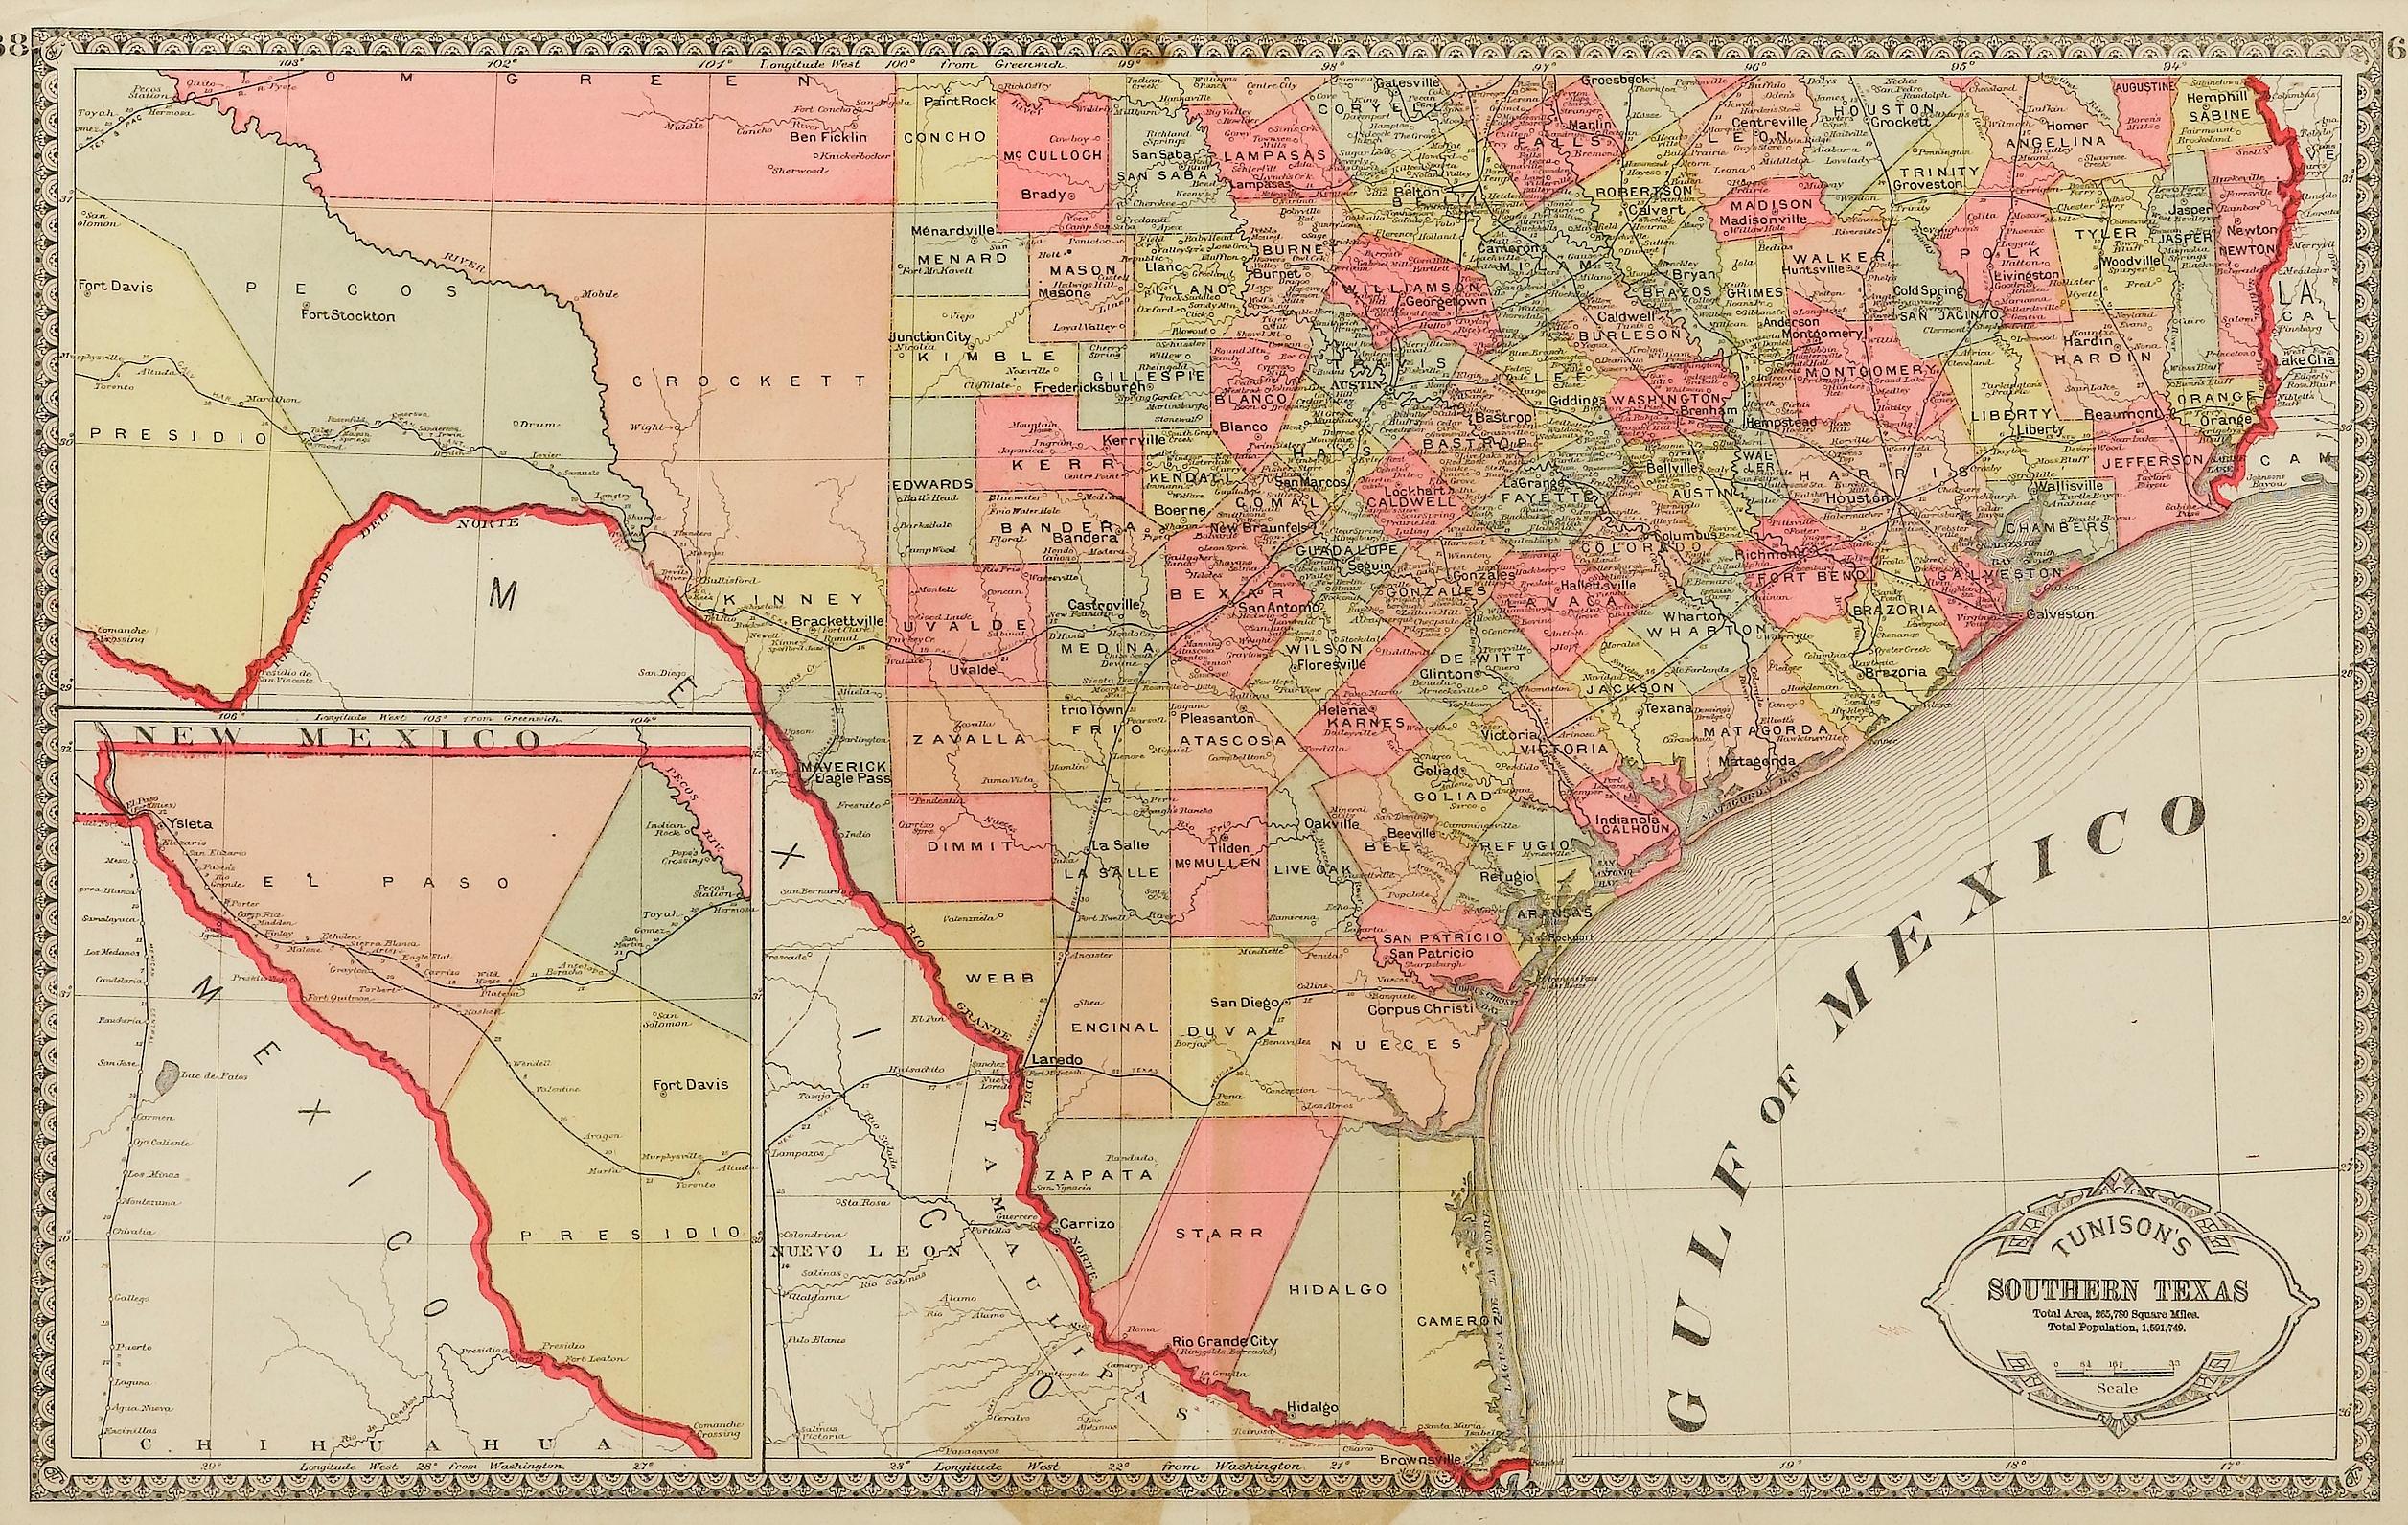 This original map Tunison's Southern Texas was published by H.C. Tunison, circa 1885.

In true Tunison style, this is a finely lithographed map with original and bright hand coloring. By this period most mapmakers had adopted printed color rather